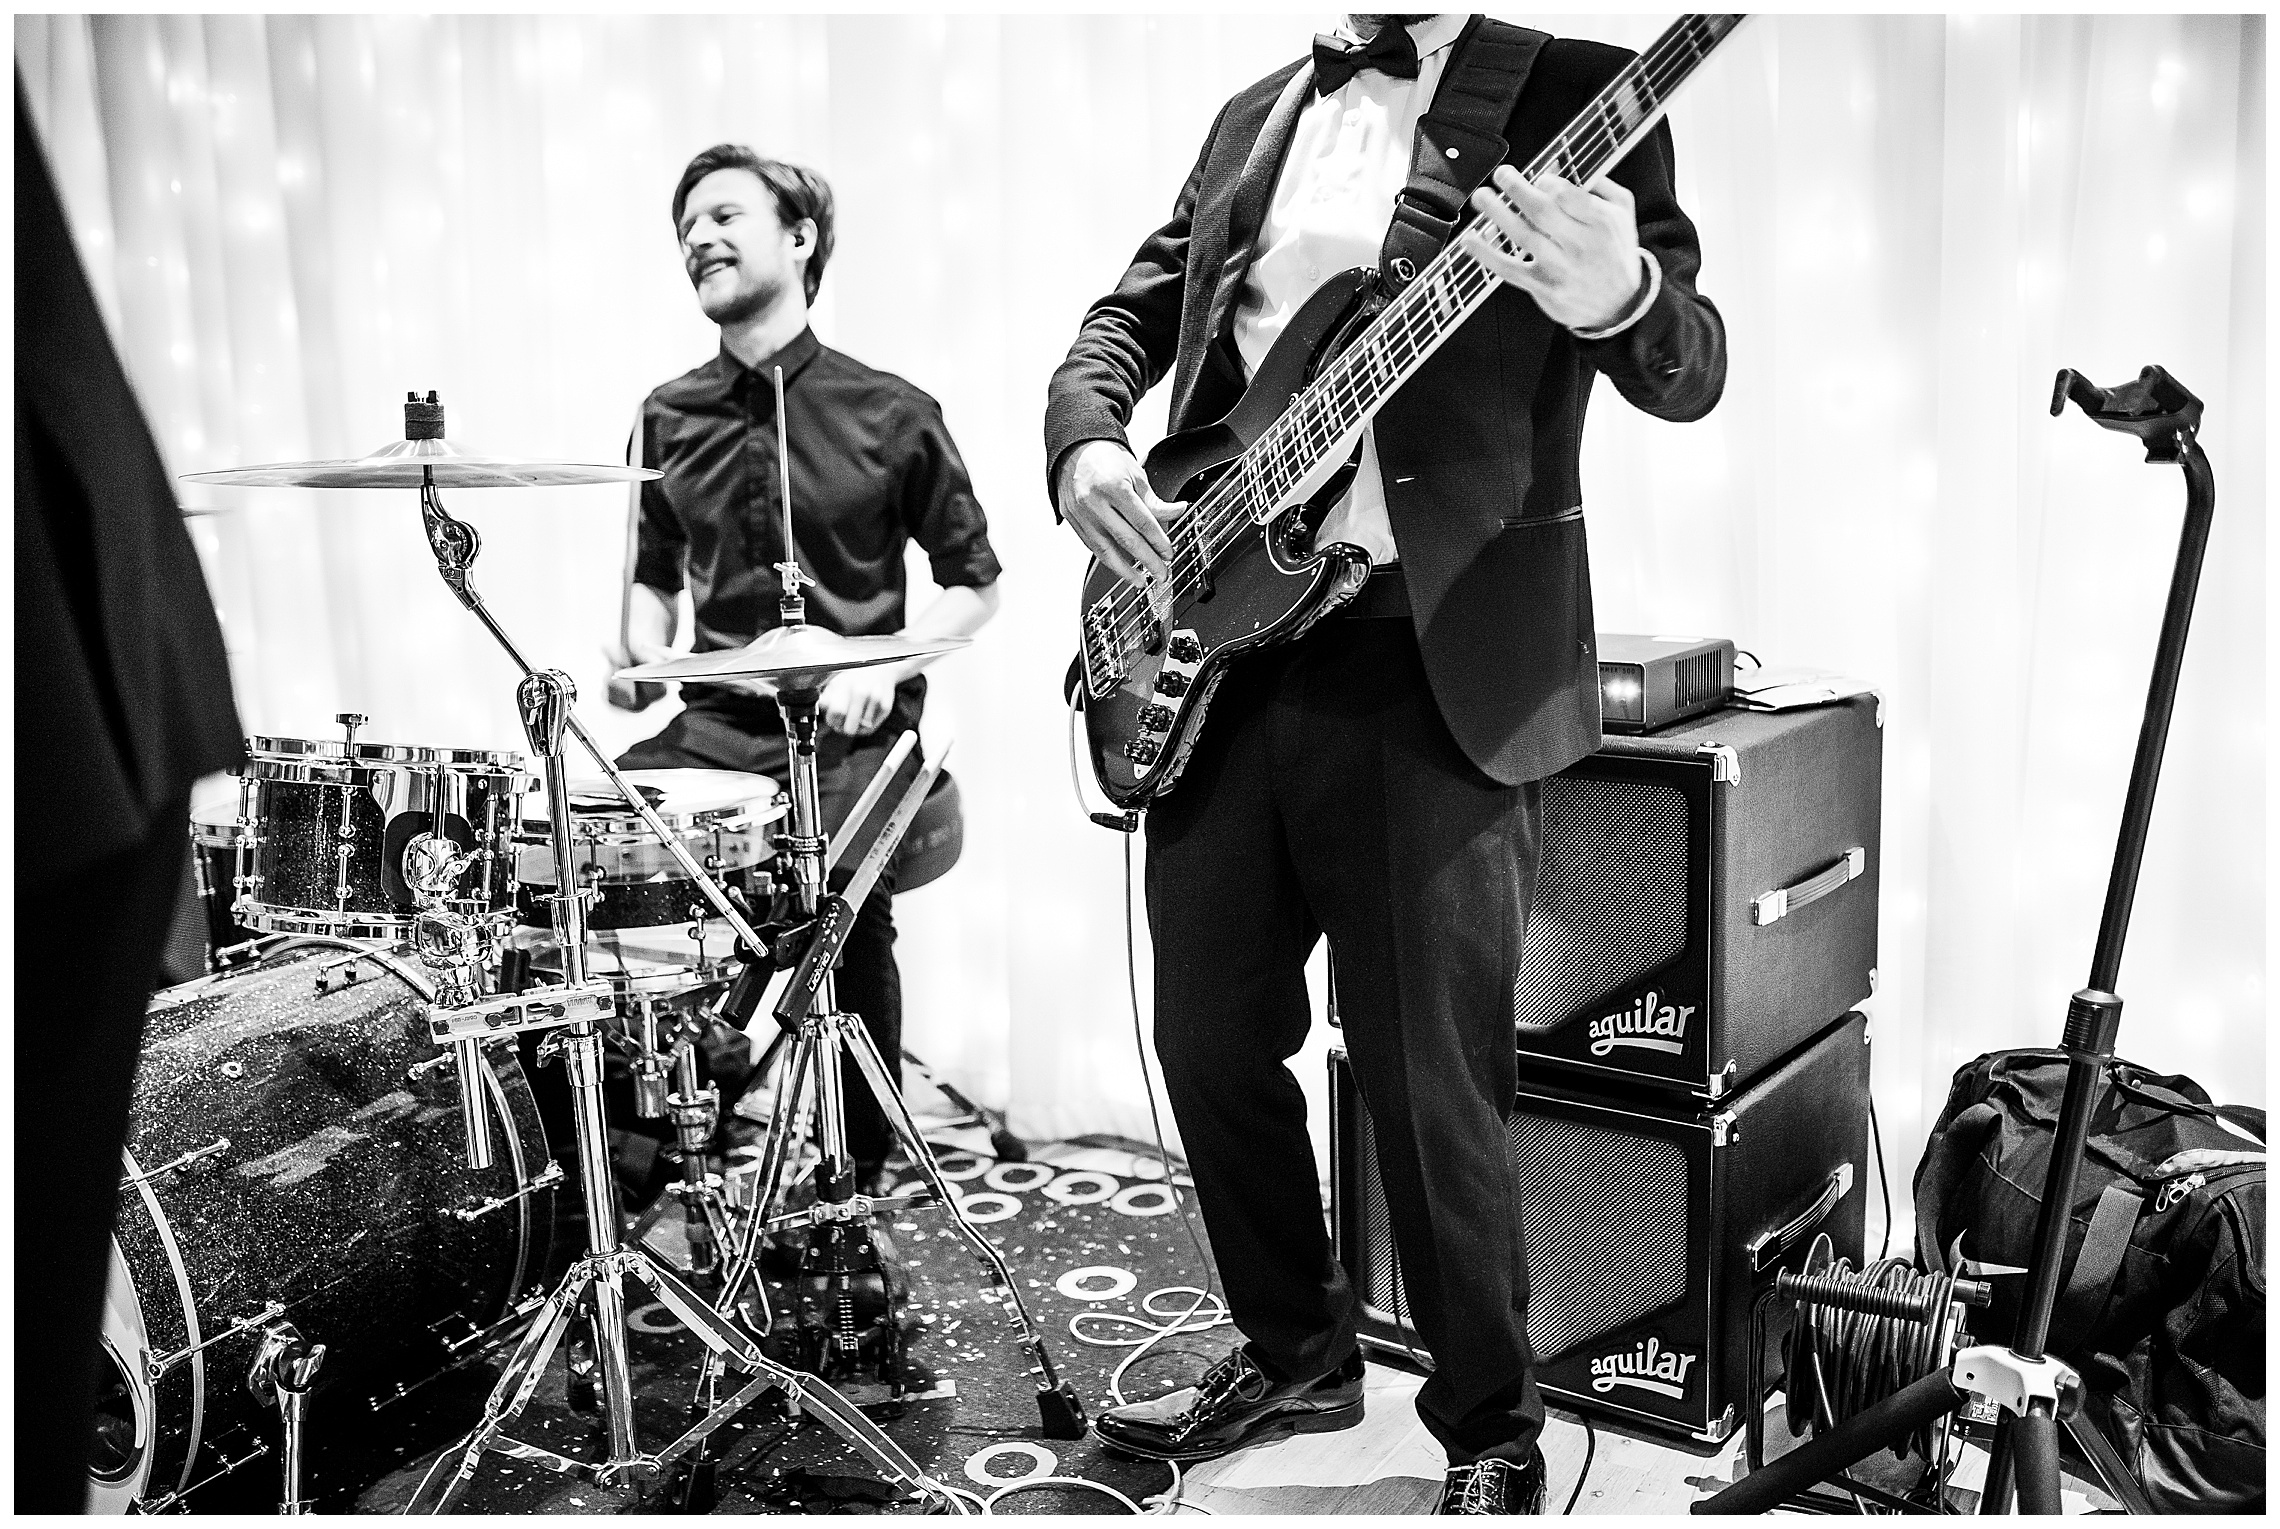 Black and white image of guitarist playing at bassmead manor barns wedding venue